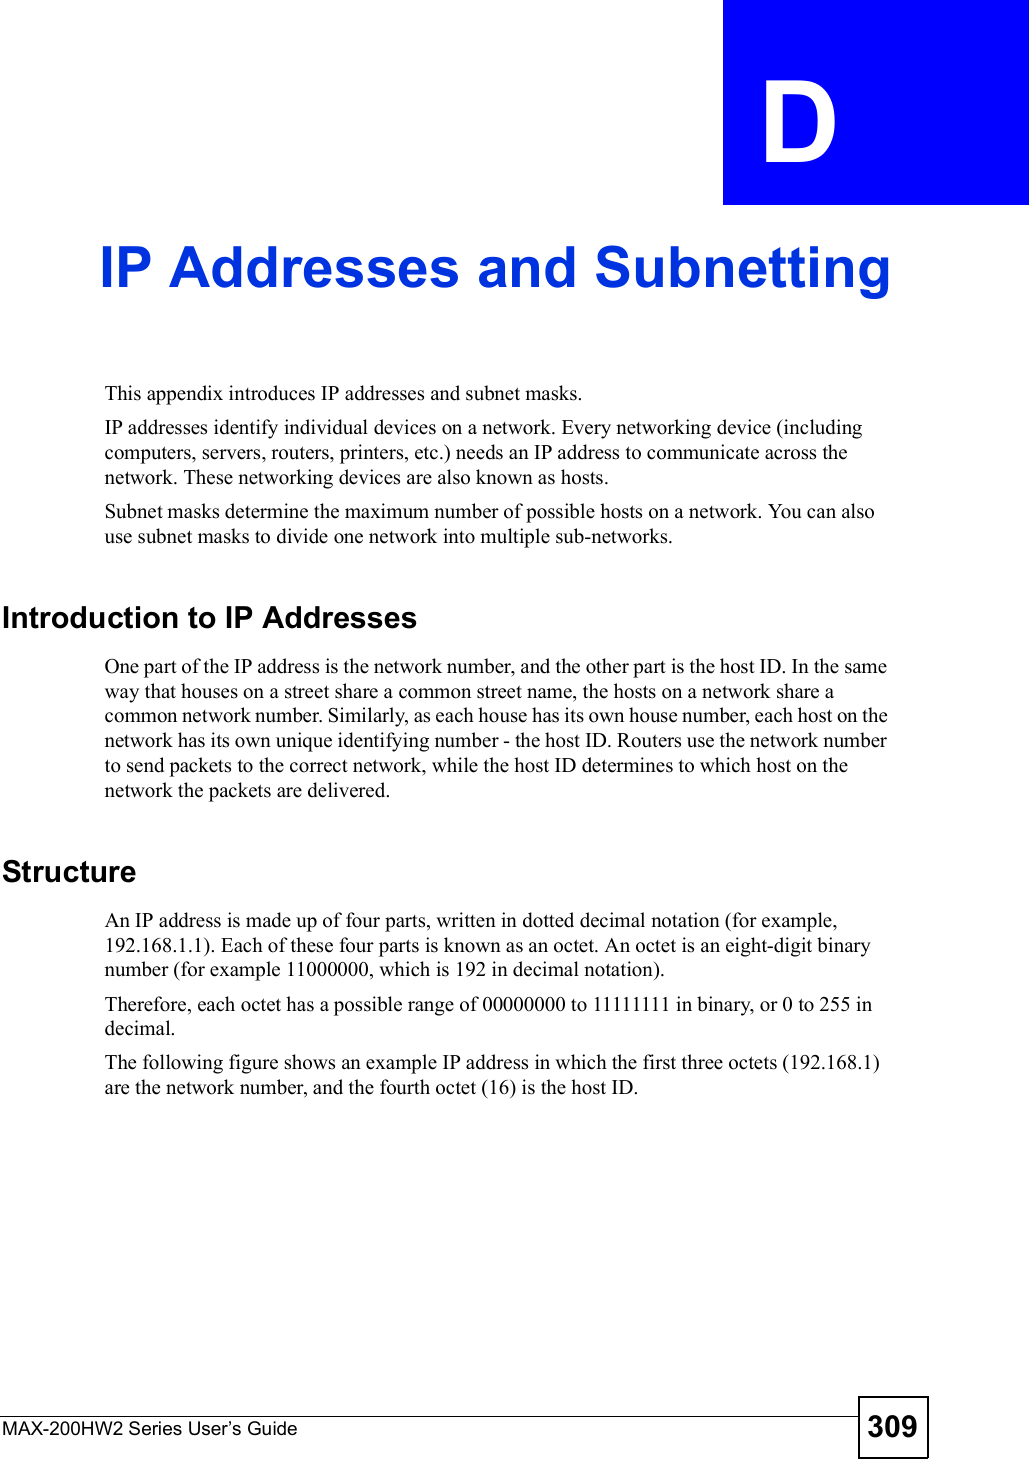 MAX-200HW2 Series User s Guide 309APPENDIX  D IP Addresses and SubnettingThis appendix introduces IP addresses and subnet masks. IP addresses identify individual devices on a network. Every networking device (including computers, servers, routers, printers, etc.) needs an IP address to communicate across the network. These networking devices are also known as hosts.Subnet masks determine the maximum number of possible hosts on a network. You can also use subnet masks to divide one network into multiple sub-networks.Introduction to IP AddressesOne part of the IP address is the network number, and the other part is the host ID. In the same way that houses on a street share a common street name, the hosts on a network share a common network number. Similarly, as each house has its own house number, each host on the network has its own unique identifying number - the host ID. Routers use the network number to send packets to the correct network, while the host ID determines to which host on the network the packets are delivered.StructureAn IP address is made up of four parts, written in dotted decimal notation (for example, 192.168.1.1). Each of these four parts is known as an octet. An octet is an eight-digit binary number (for example 11000000, which is 192 in decimal notation). Therefore, each octet has a possible range of 00000000 to 11111111 in binary, or 0 to 255 in decimal.The following figure shows an example IP address in which the first three octets (192.168.1) are the network number, and the fourth octet (16) is the host ID.